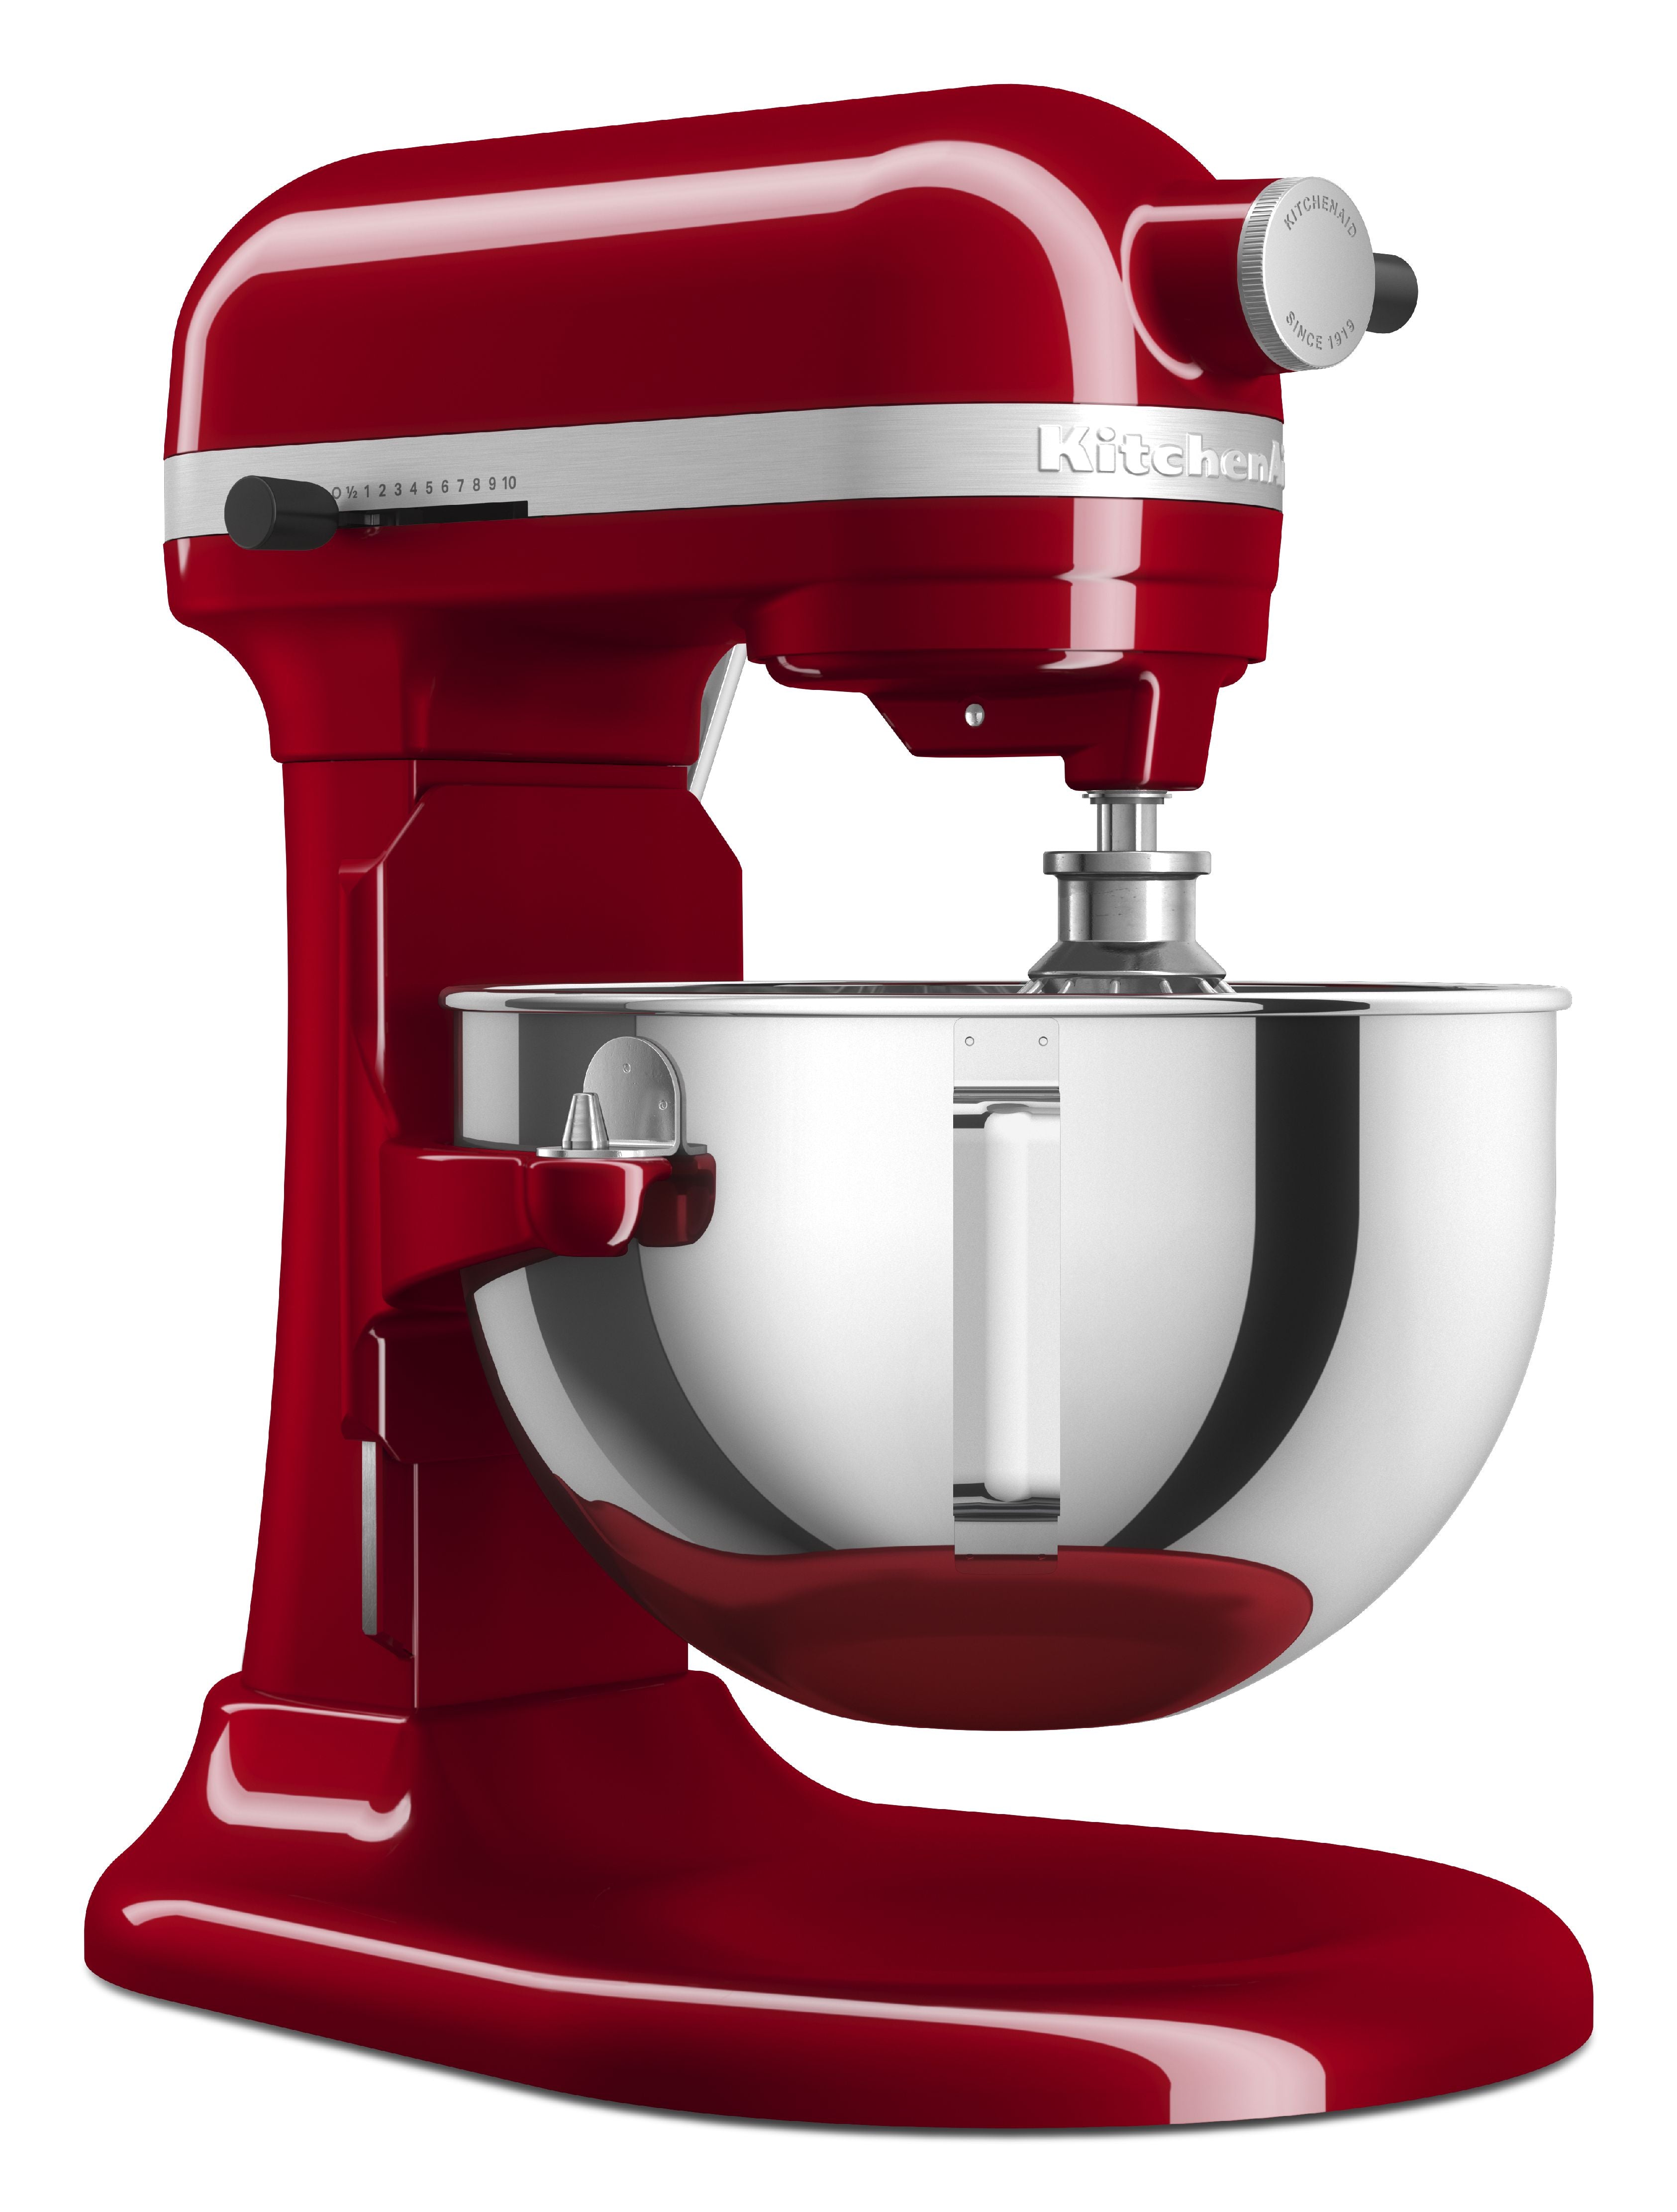 Kitchen Aid High Duty Bowl Lift Stand Mixer 5.2 L, Empire Red